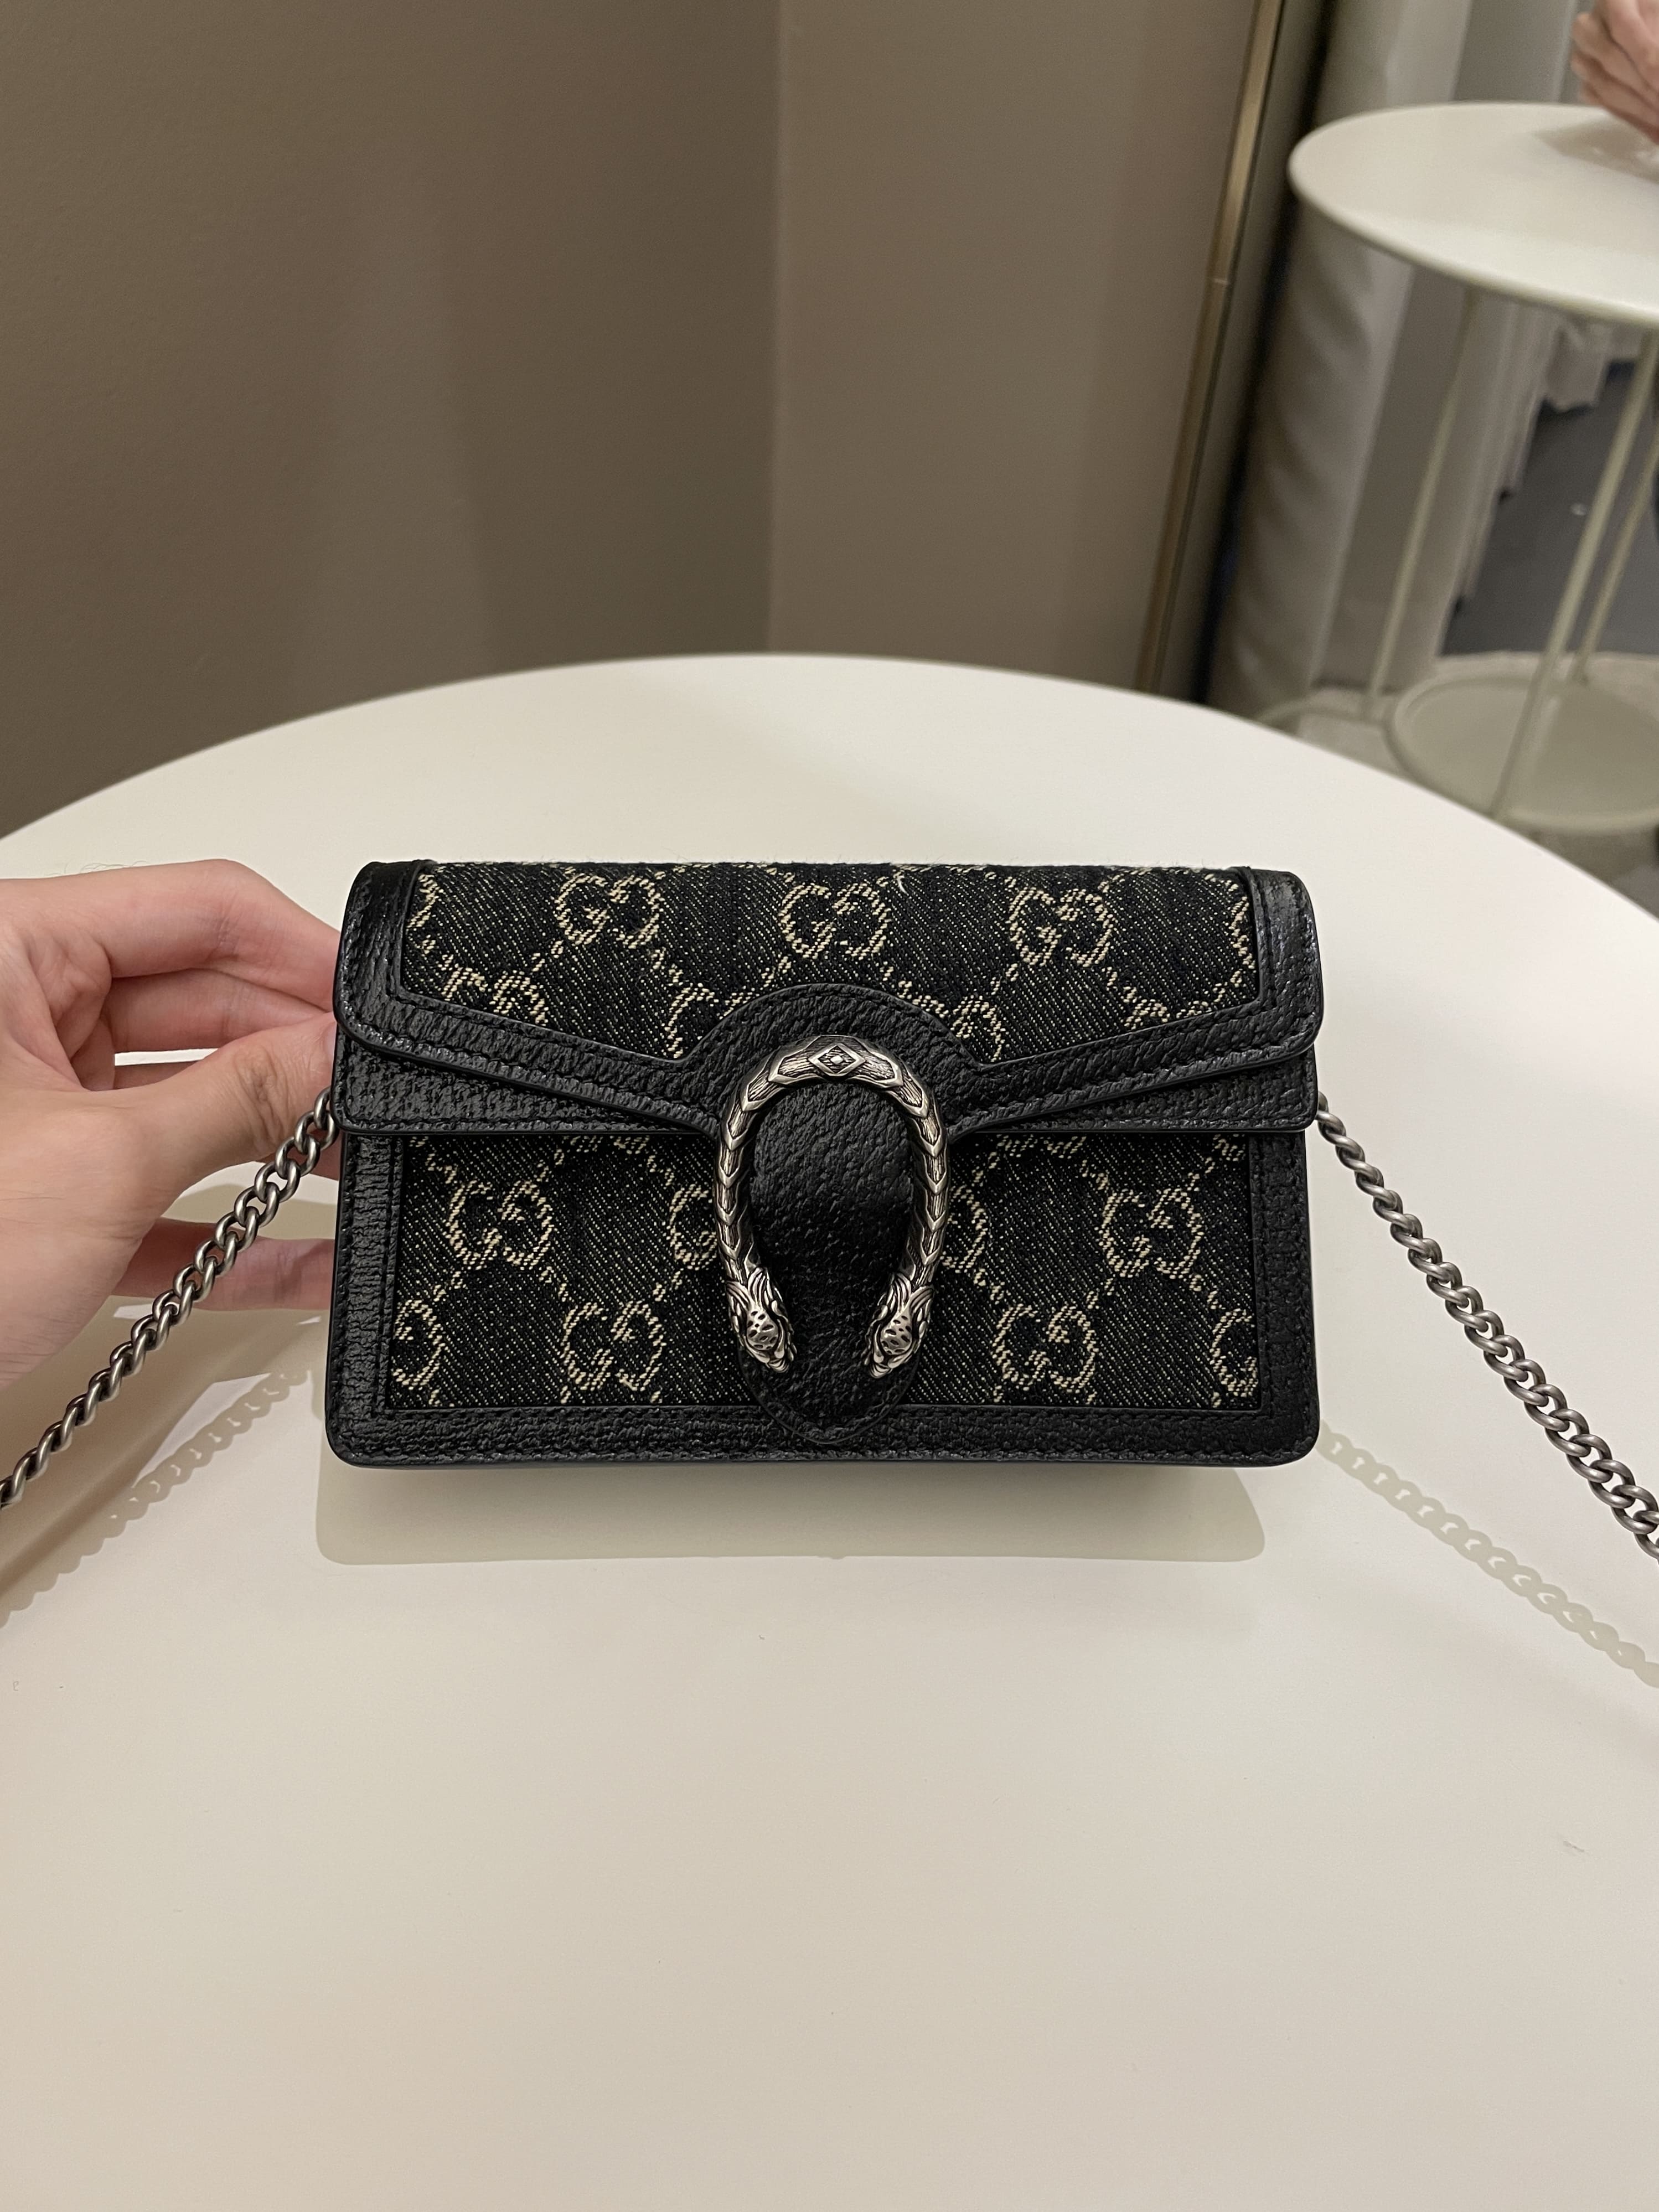 Gucci Black Leather Dionysus Coin Purse price in Pakistan - Telemart Pakistan